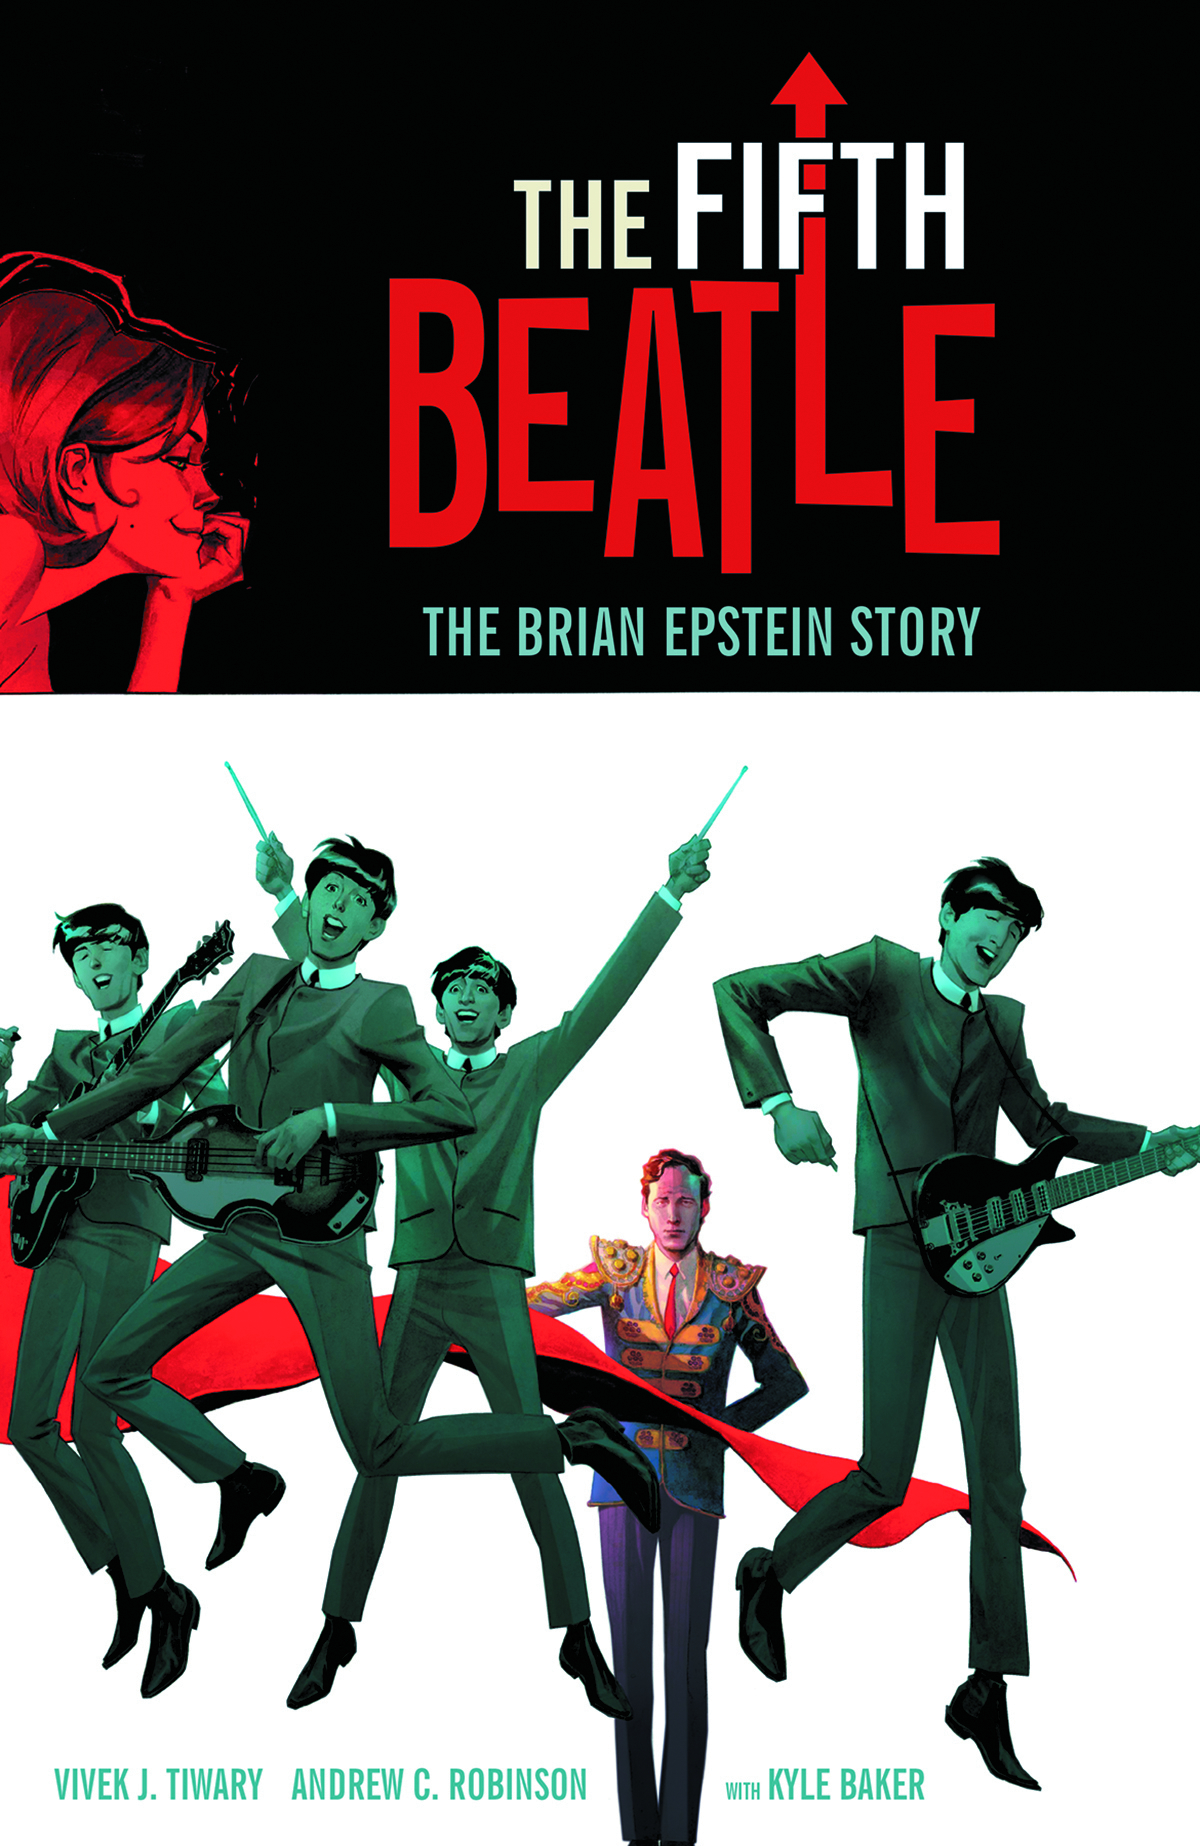 Fifth Beatle The Brian Epstein Story Limited Edition Hardcover